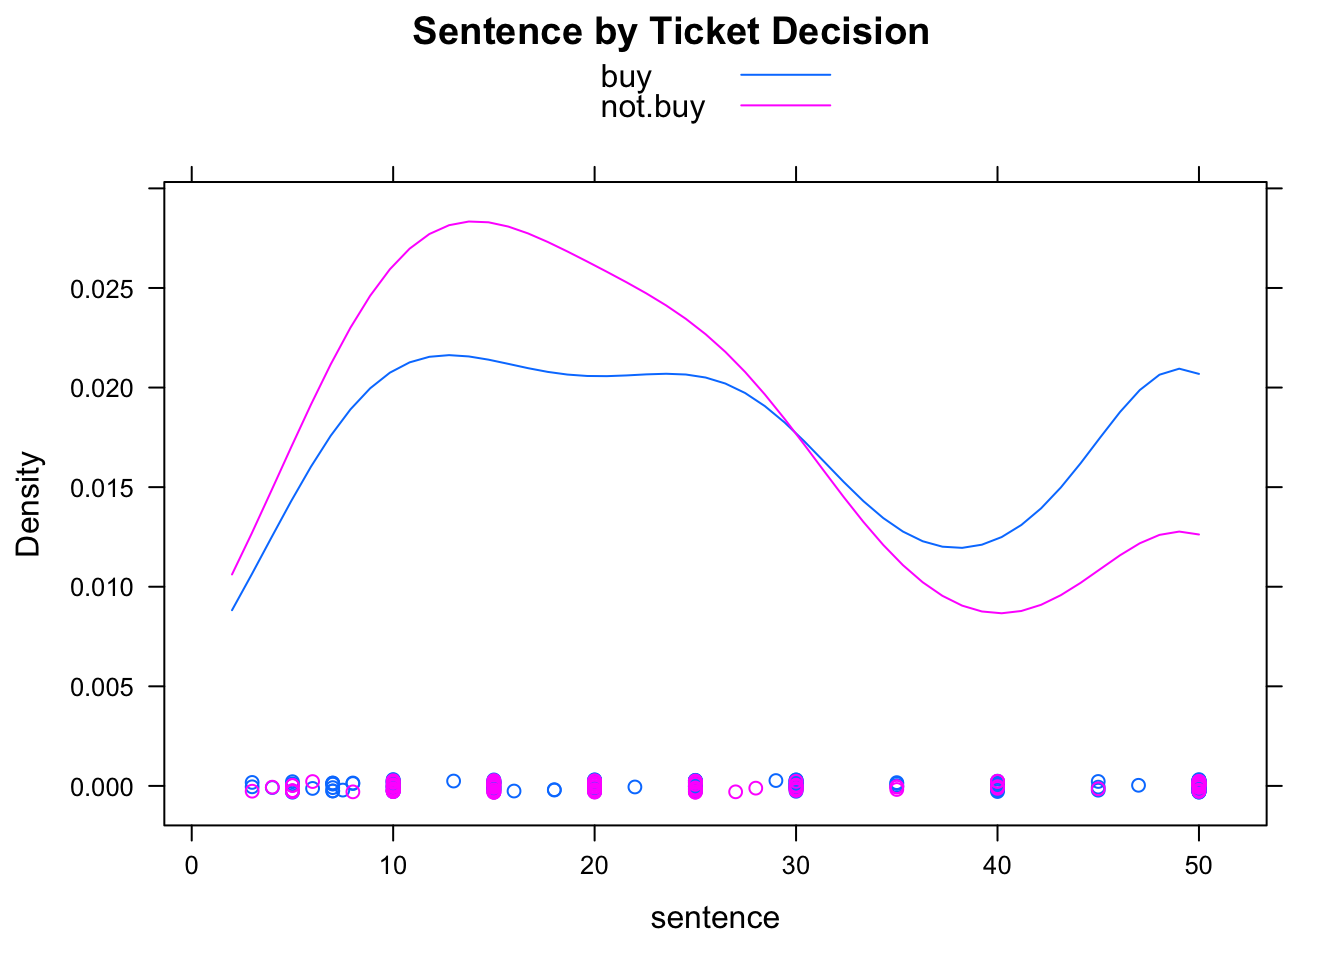 Sentence and Ticket Decision